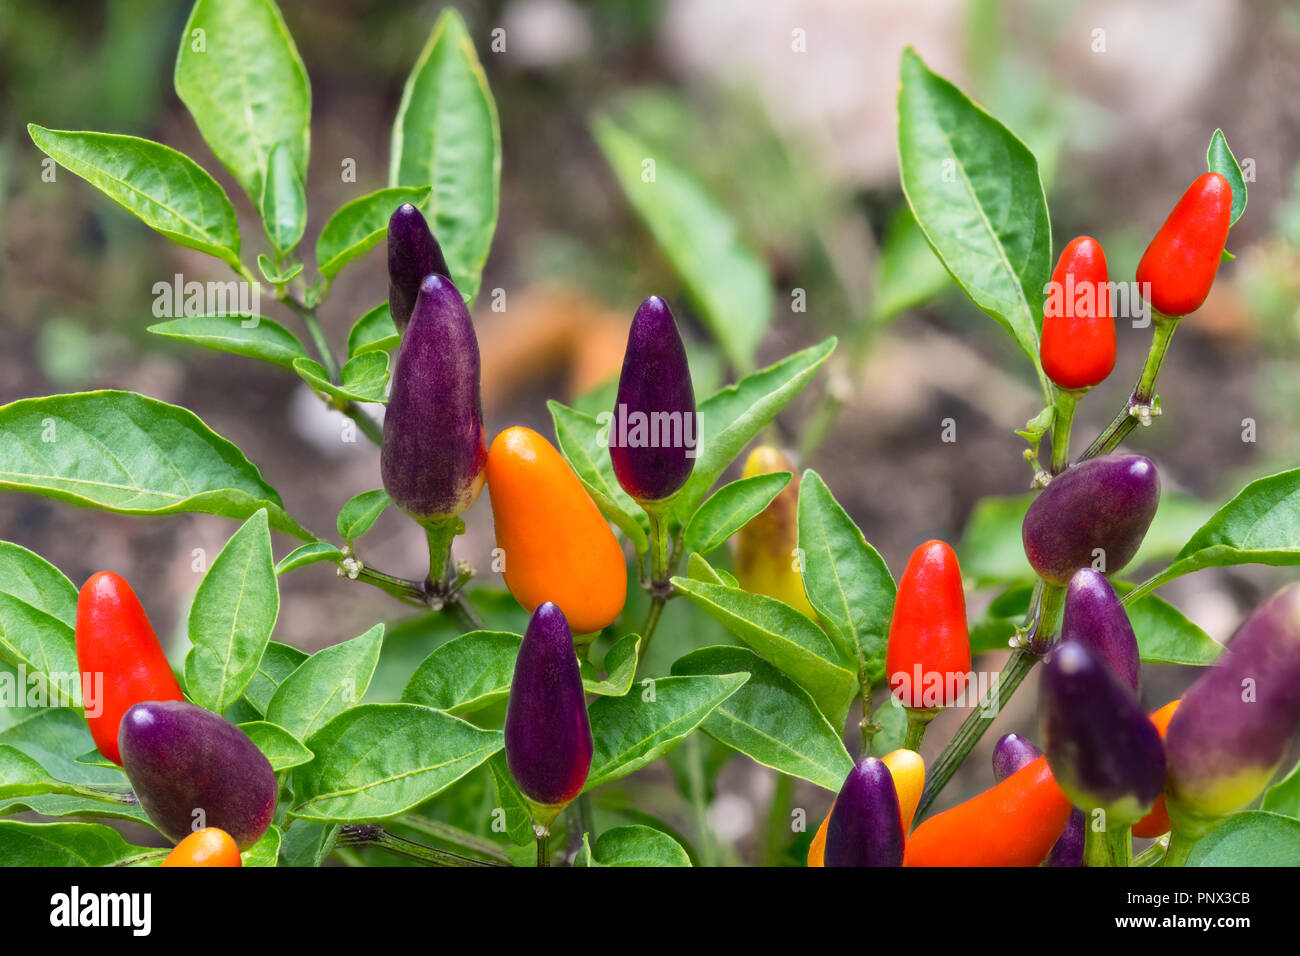 Small red hot chili peppers close-up. Capsicum frutescens. Growing plant detail. Garden bed, greenhouse. Spicy bio capsicums, green leaves. Capsaicin. Stock Photo